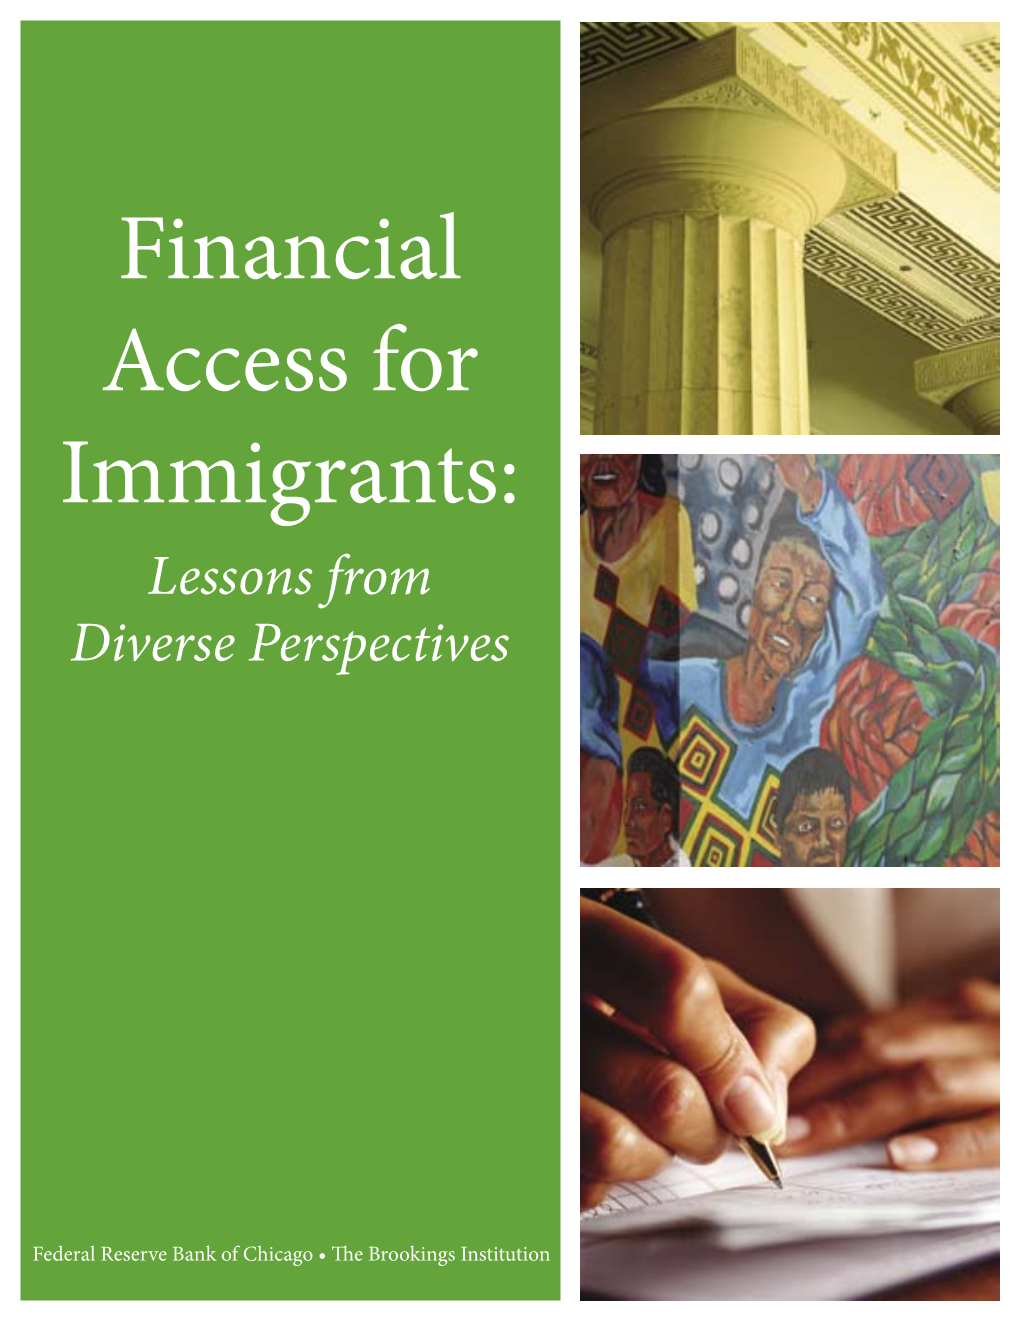 Financial Access for Immigrants: Lessons from Diverse Perspectives